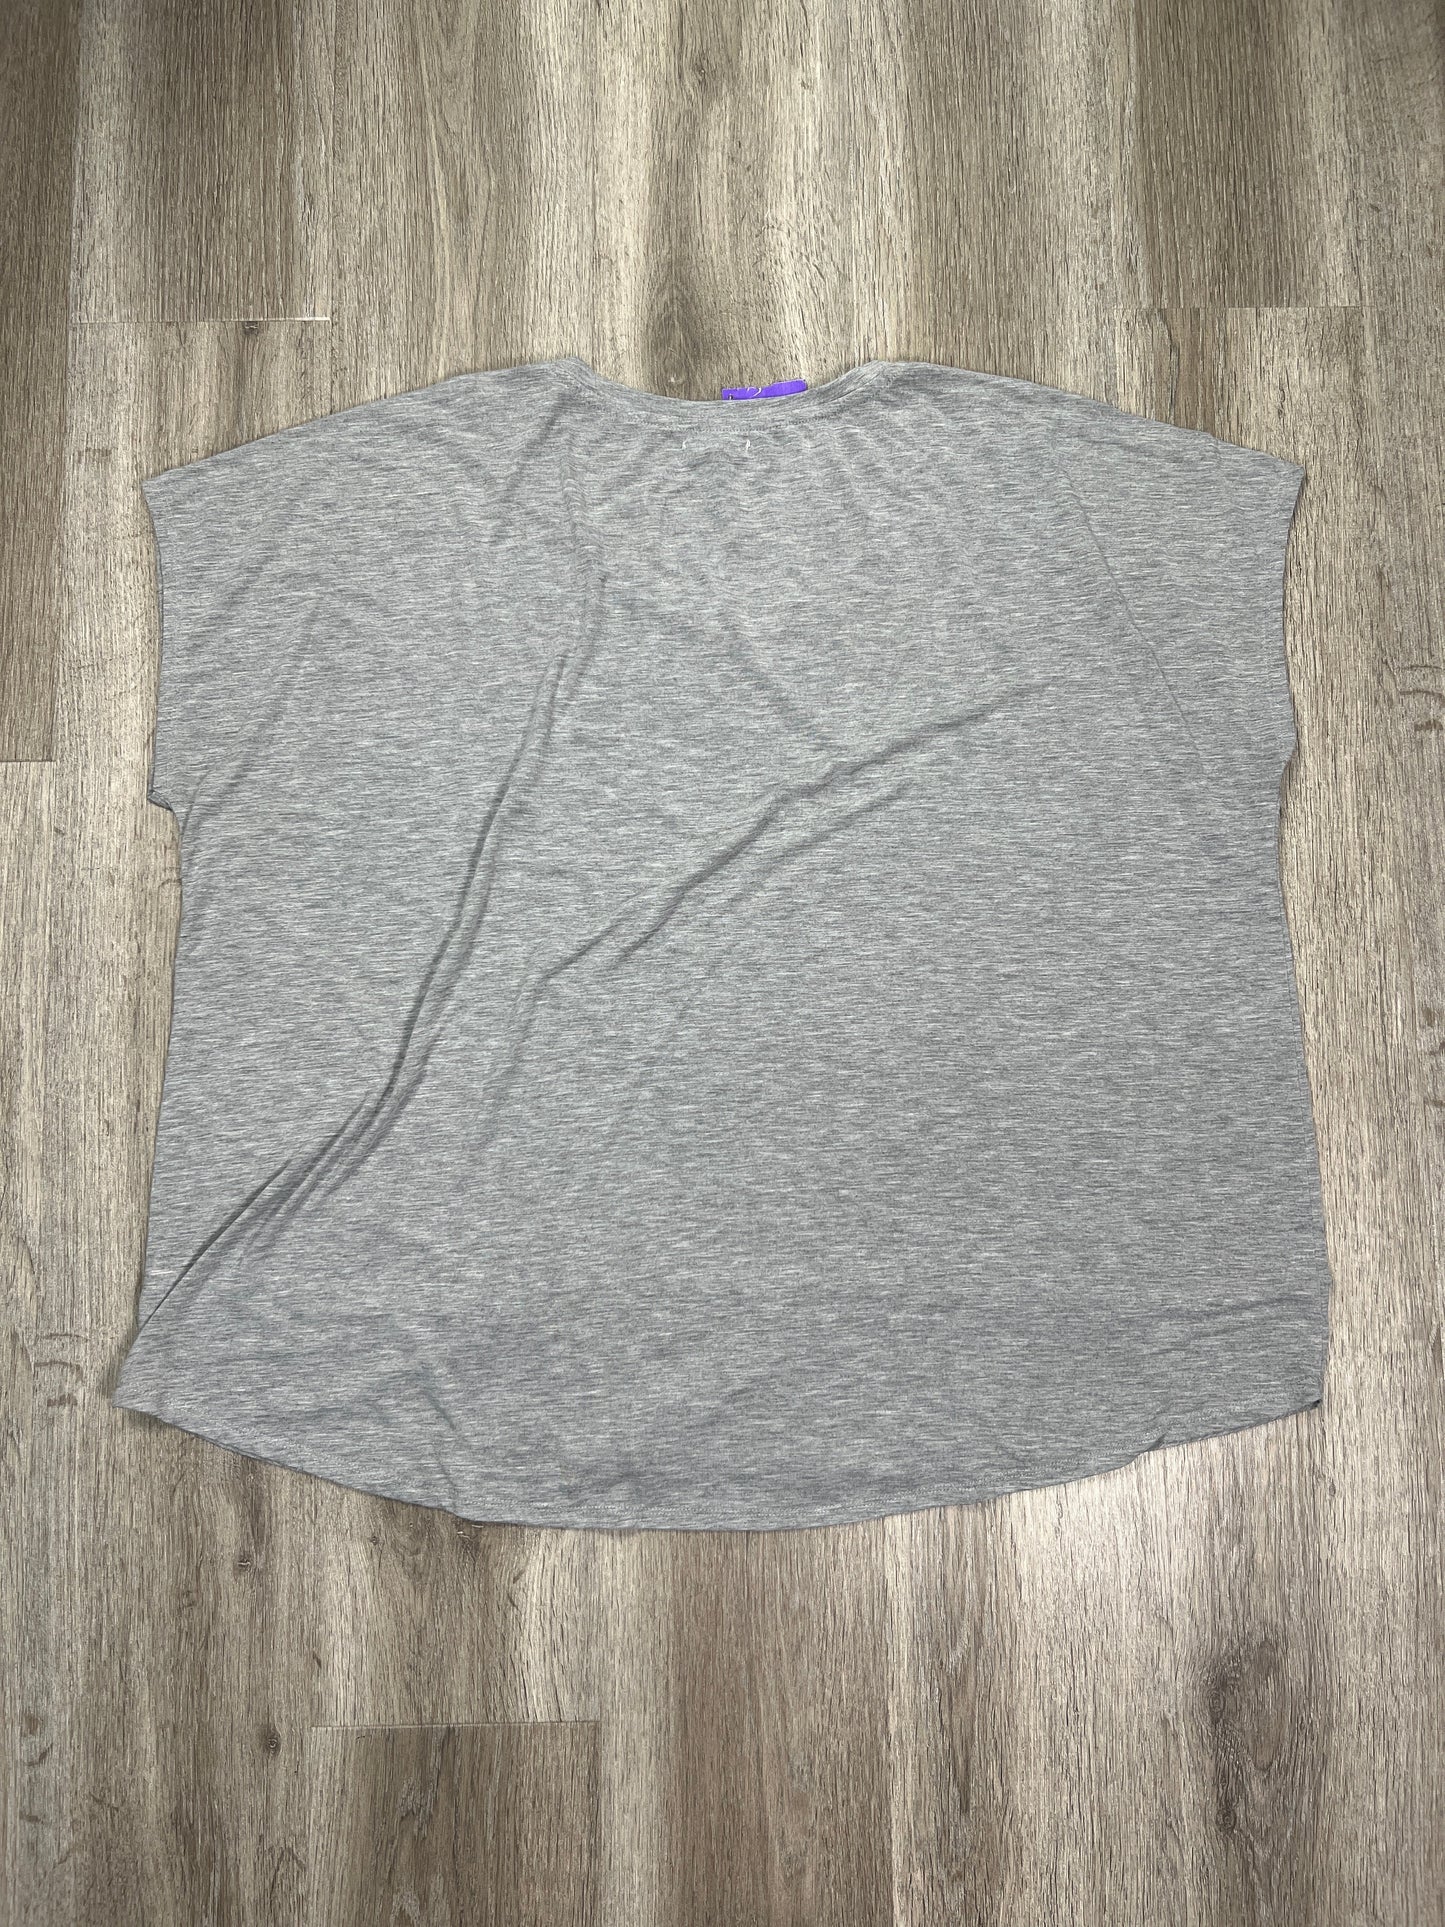 Grey Top Short Sleeve Maurices, Size 3x